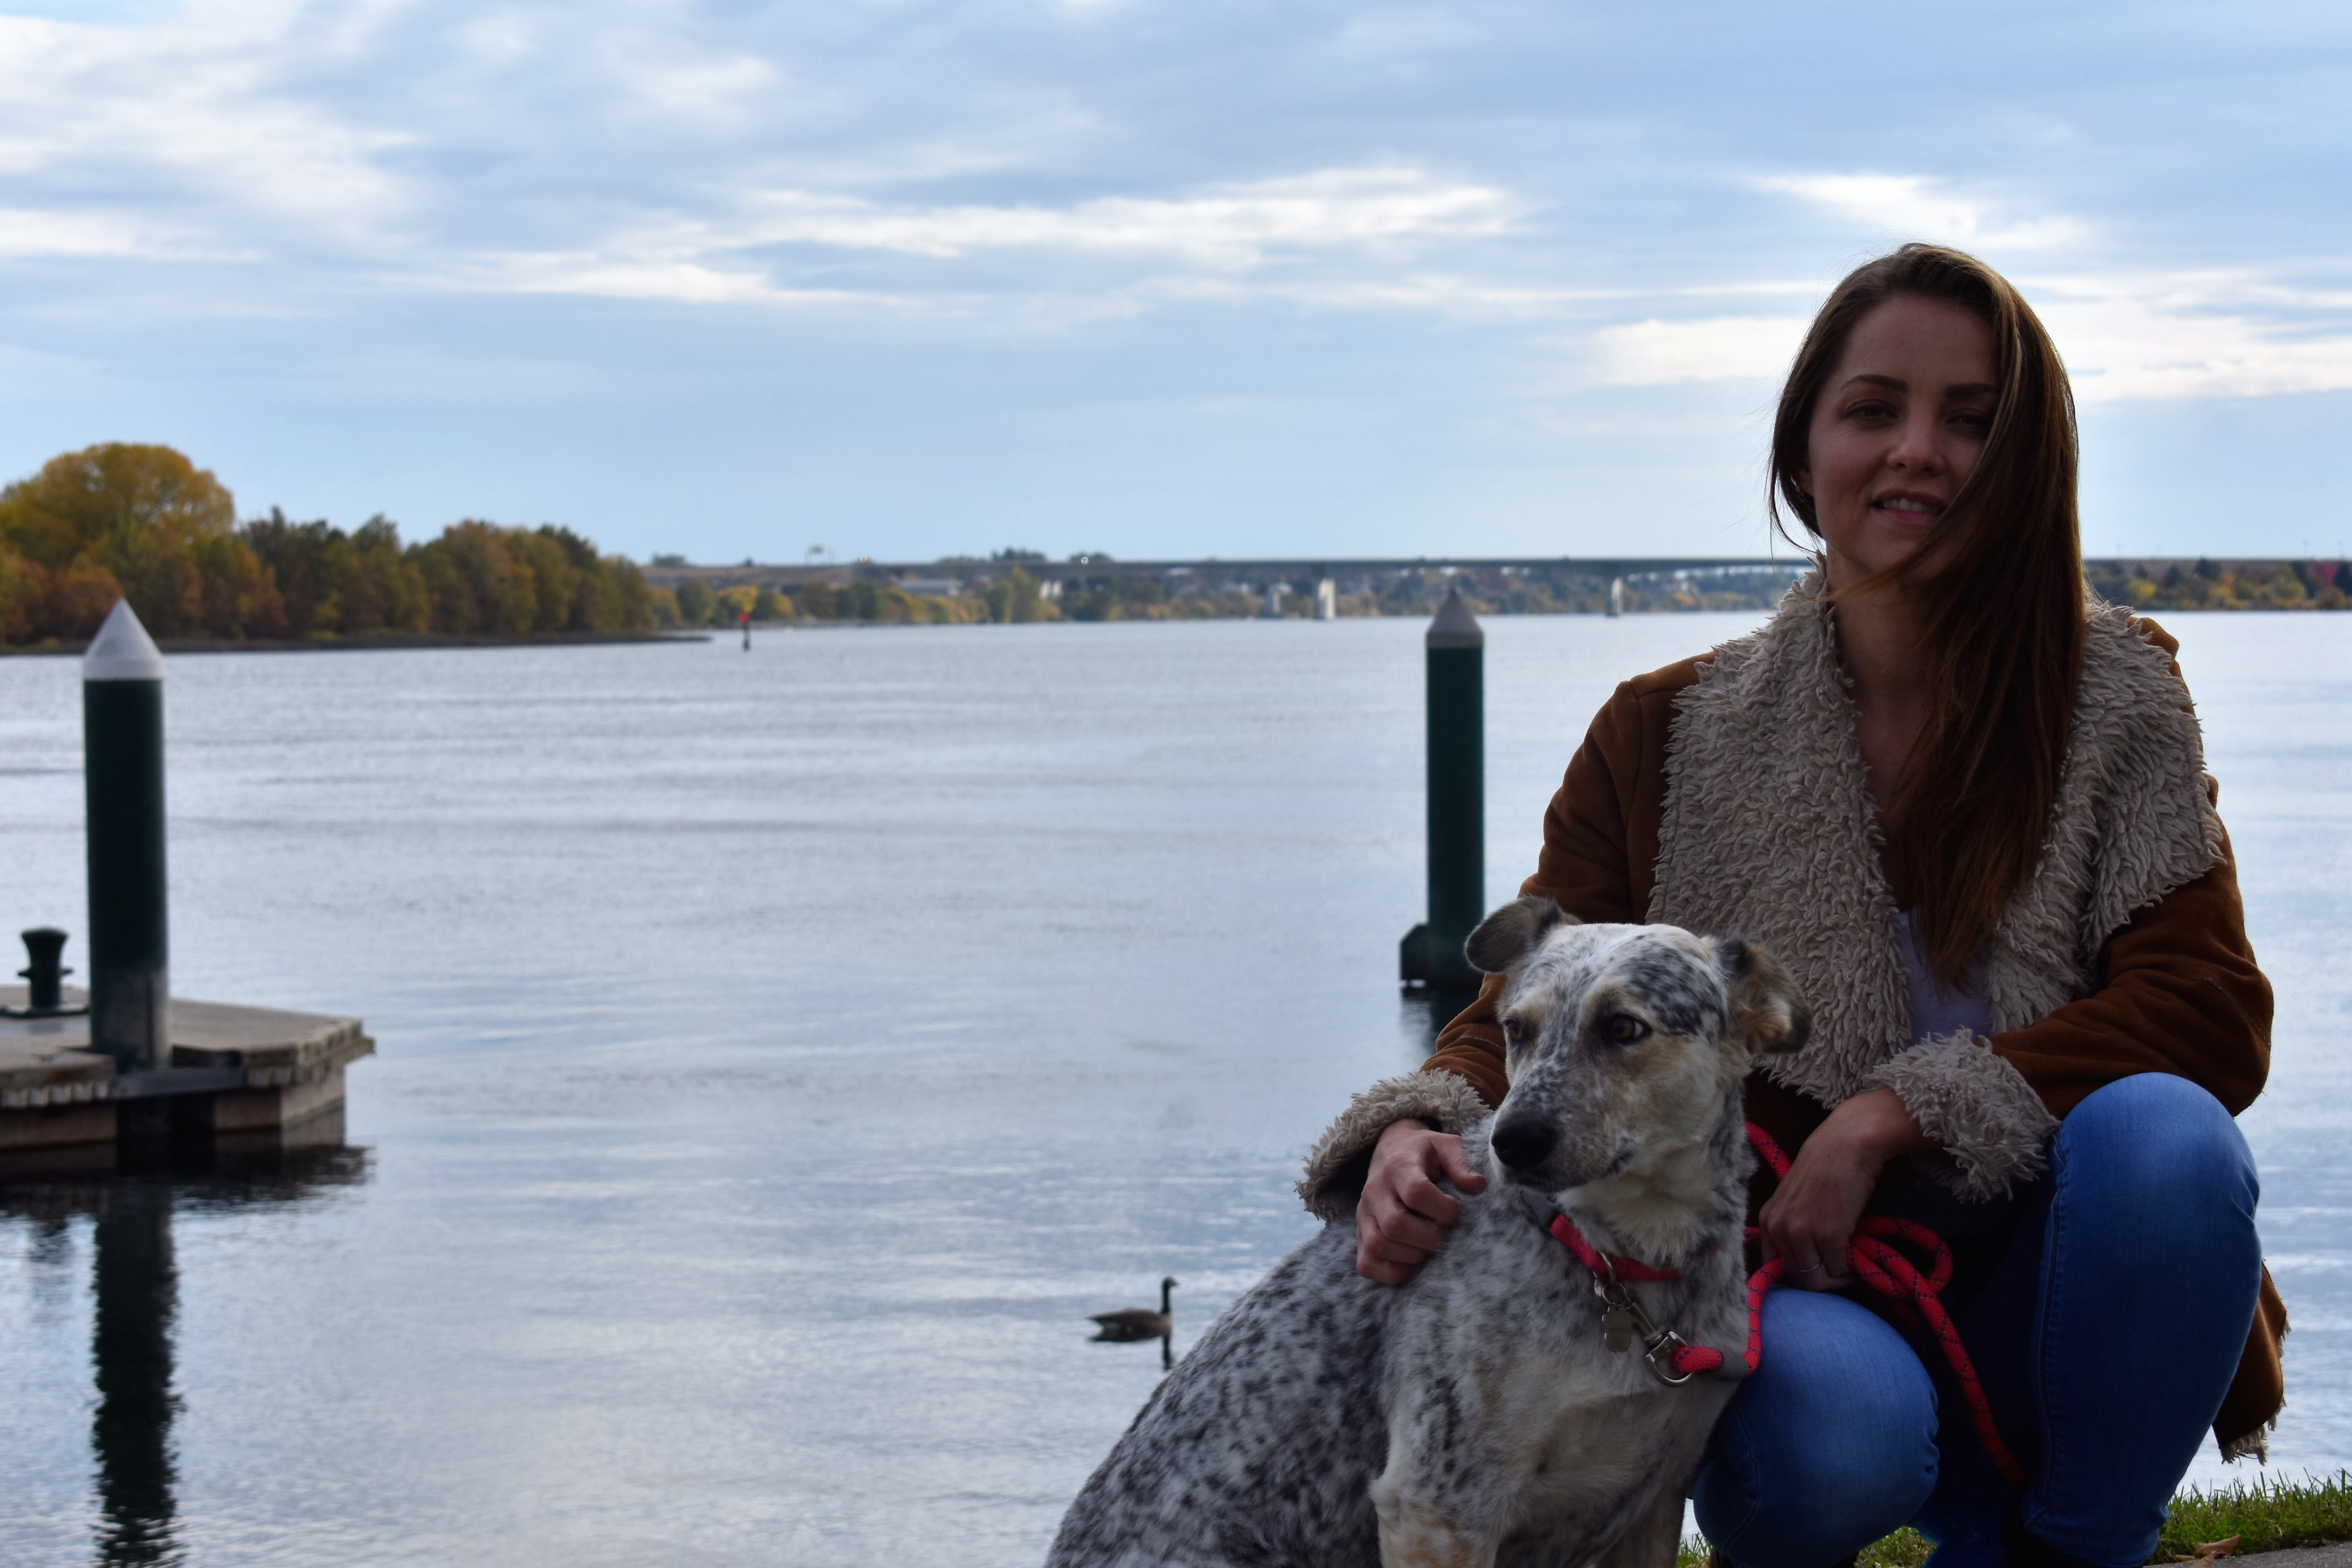 amber smiling with dog on a dock